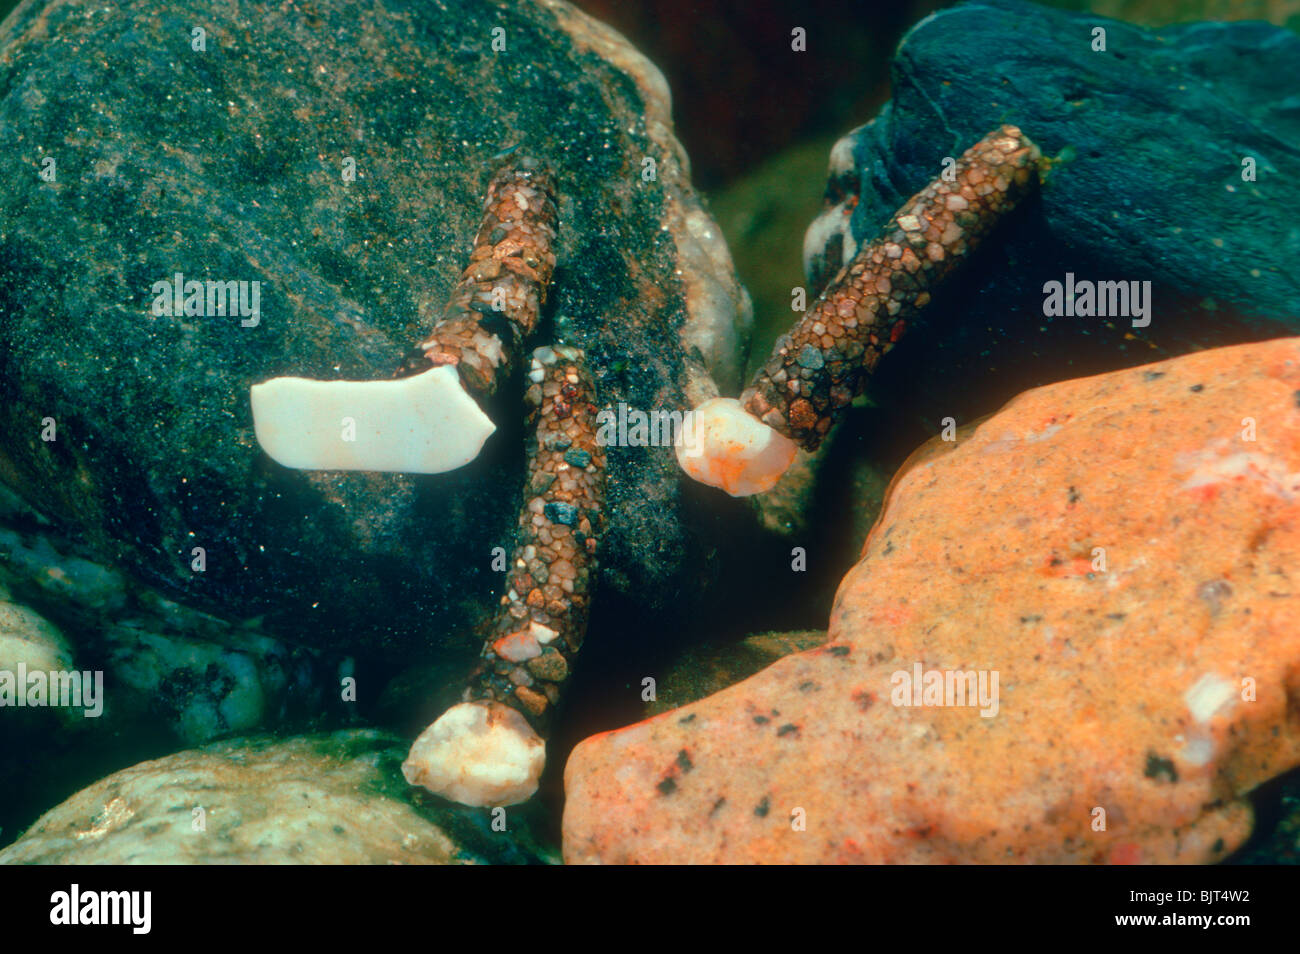 Caddis Flies, Family Limnephilidae. Three larvae protected in this larval case. Stock Photo